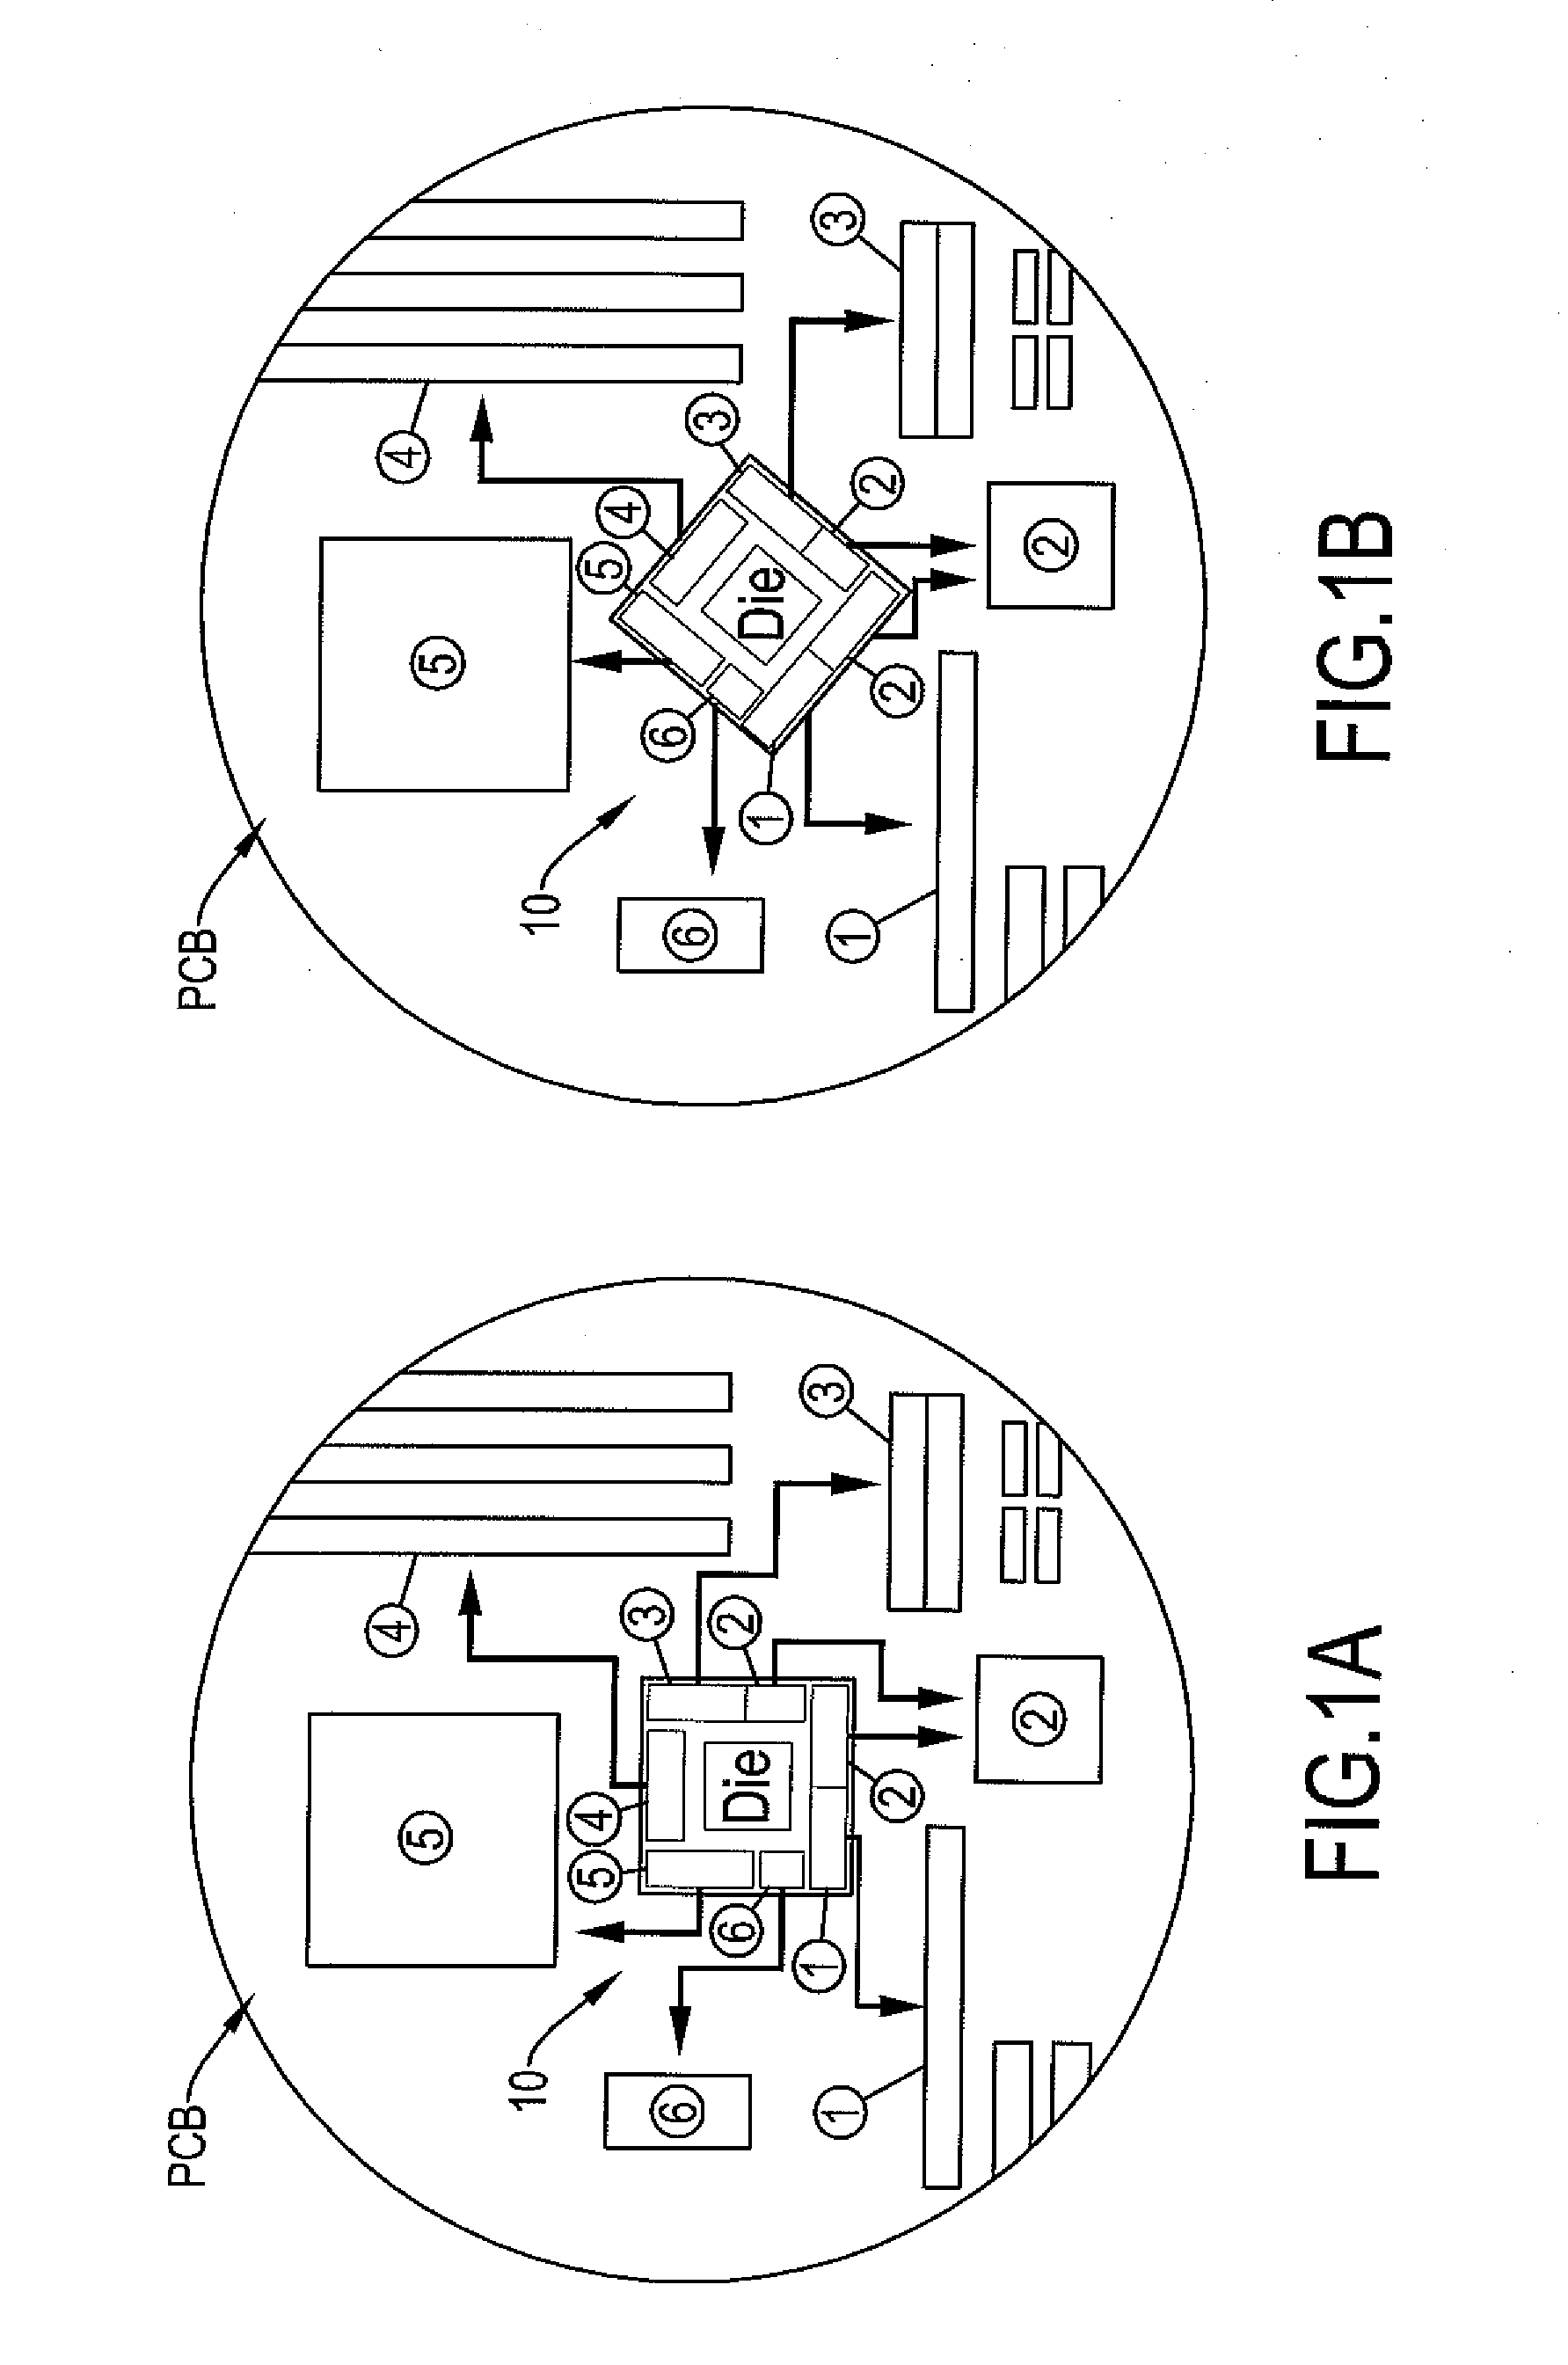 Pin-out Designation Method for Package-Board Codesign